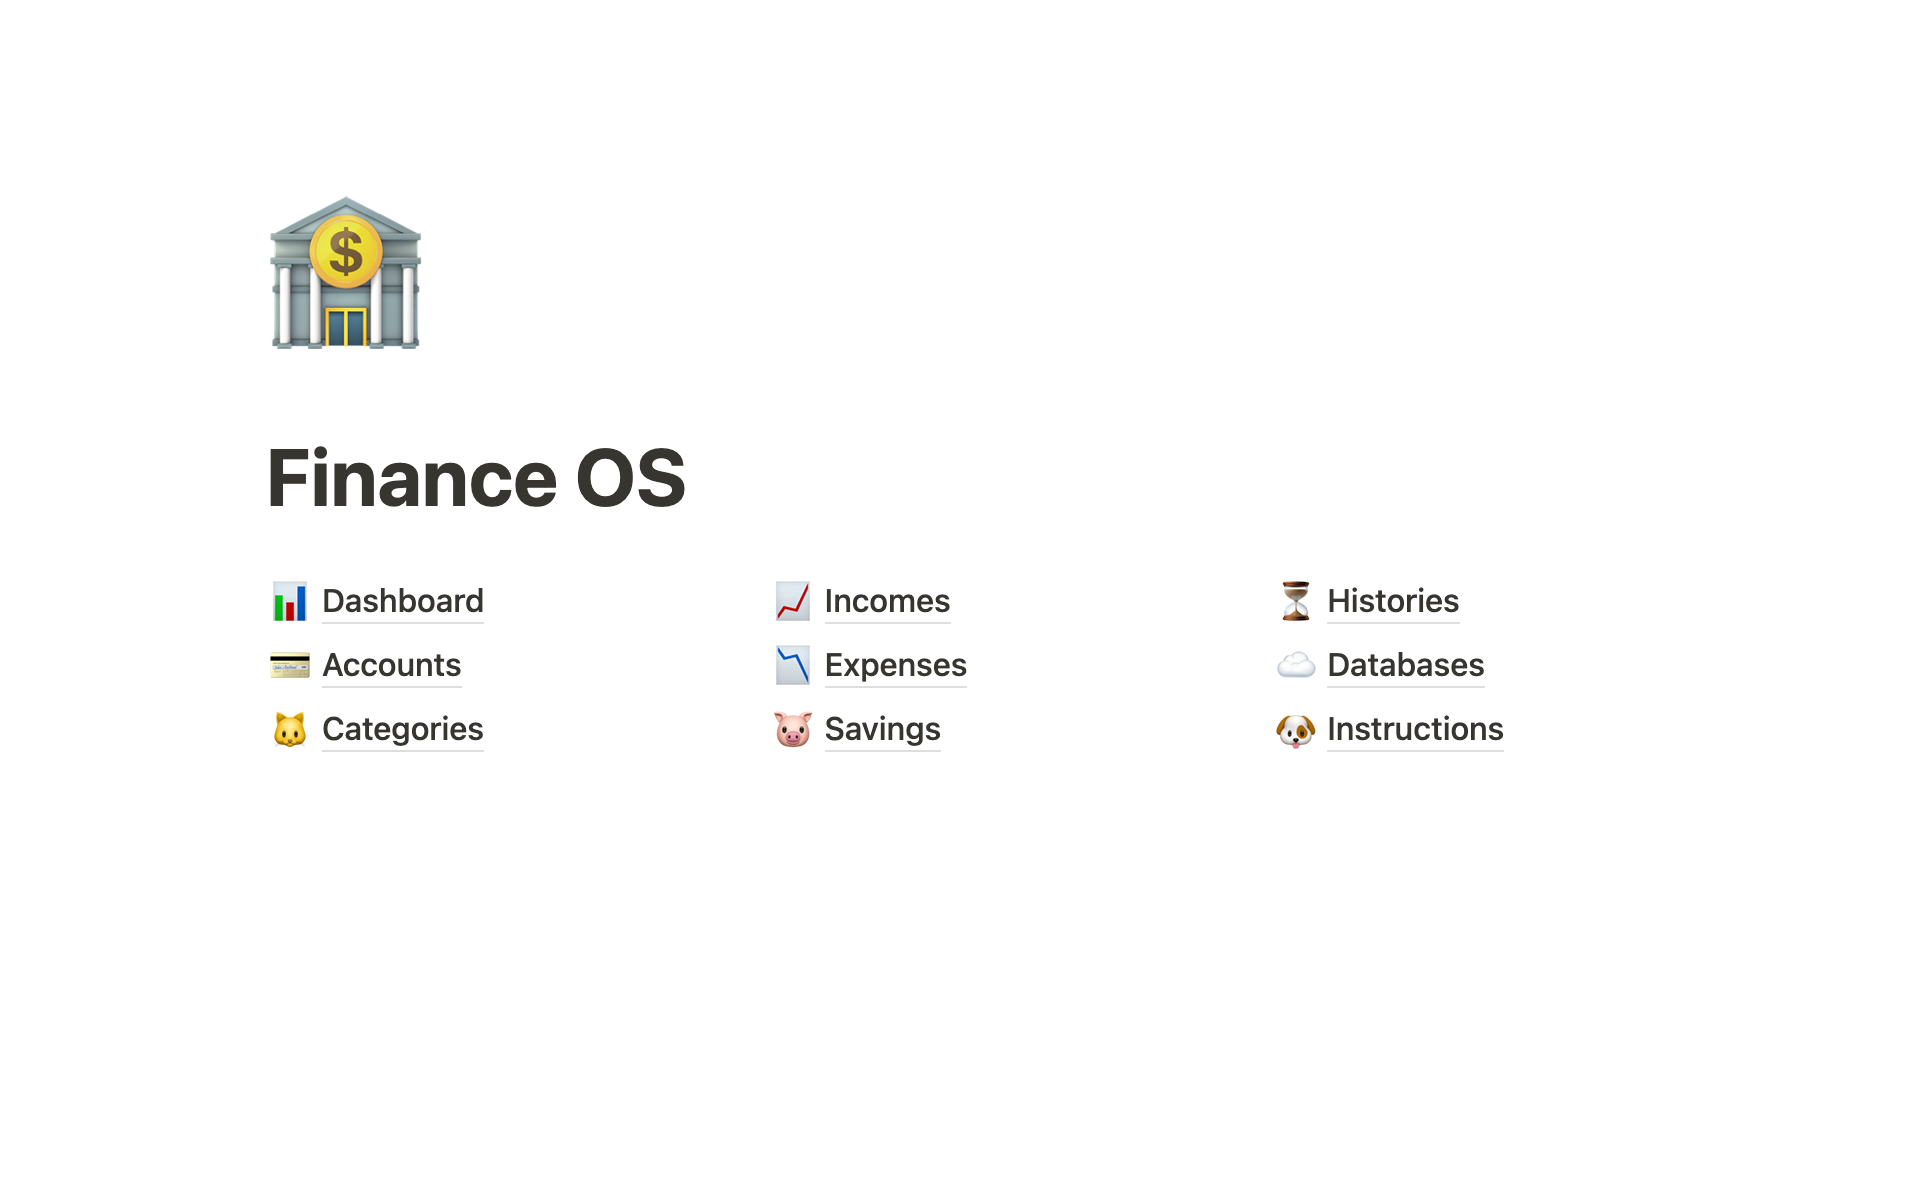 A template preview for Finance OS